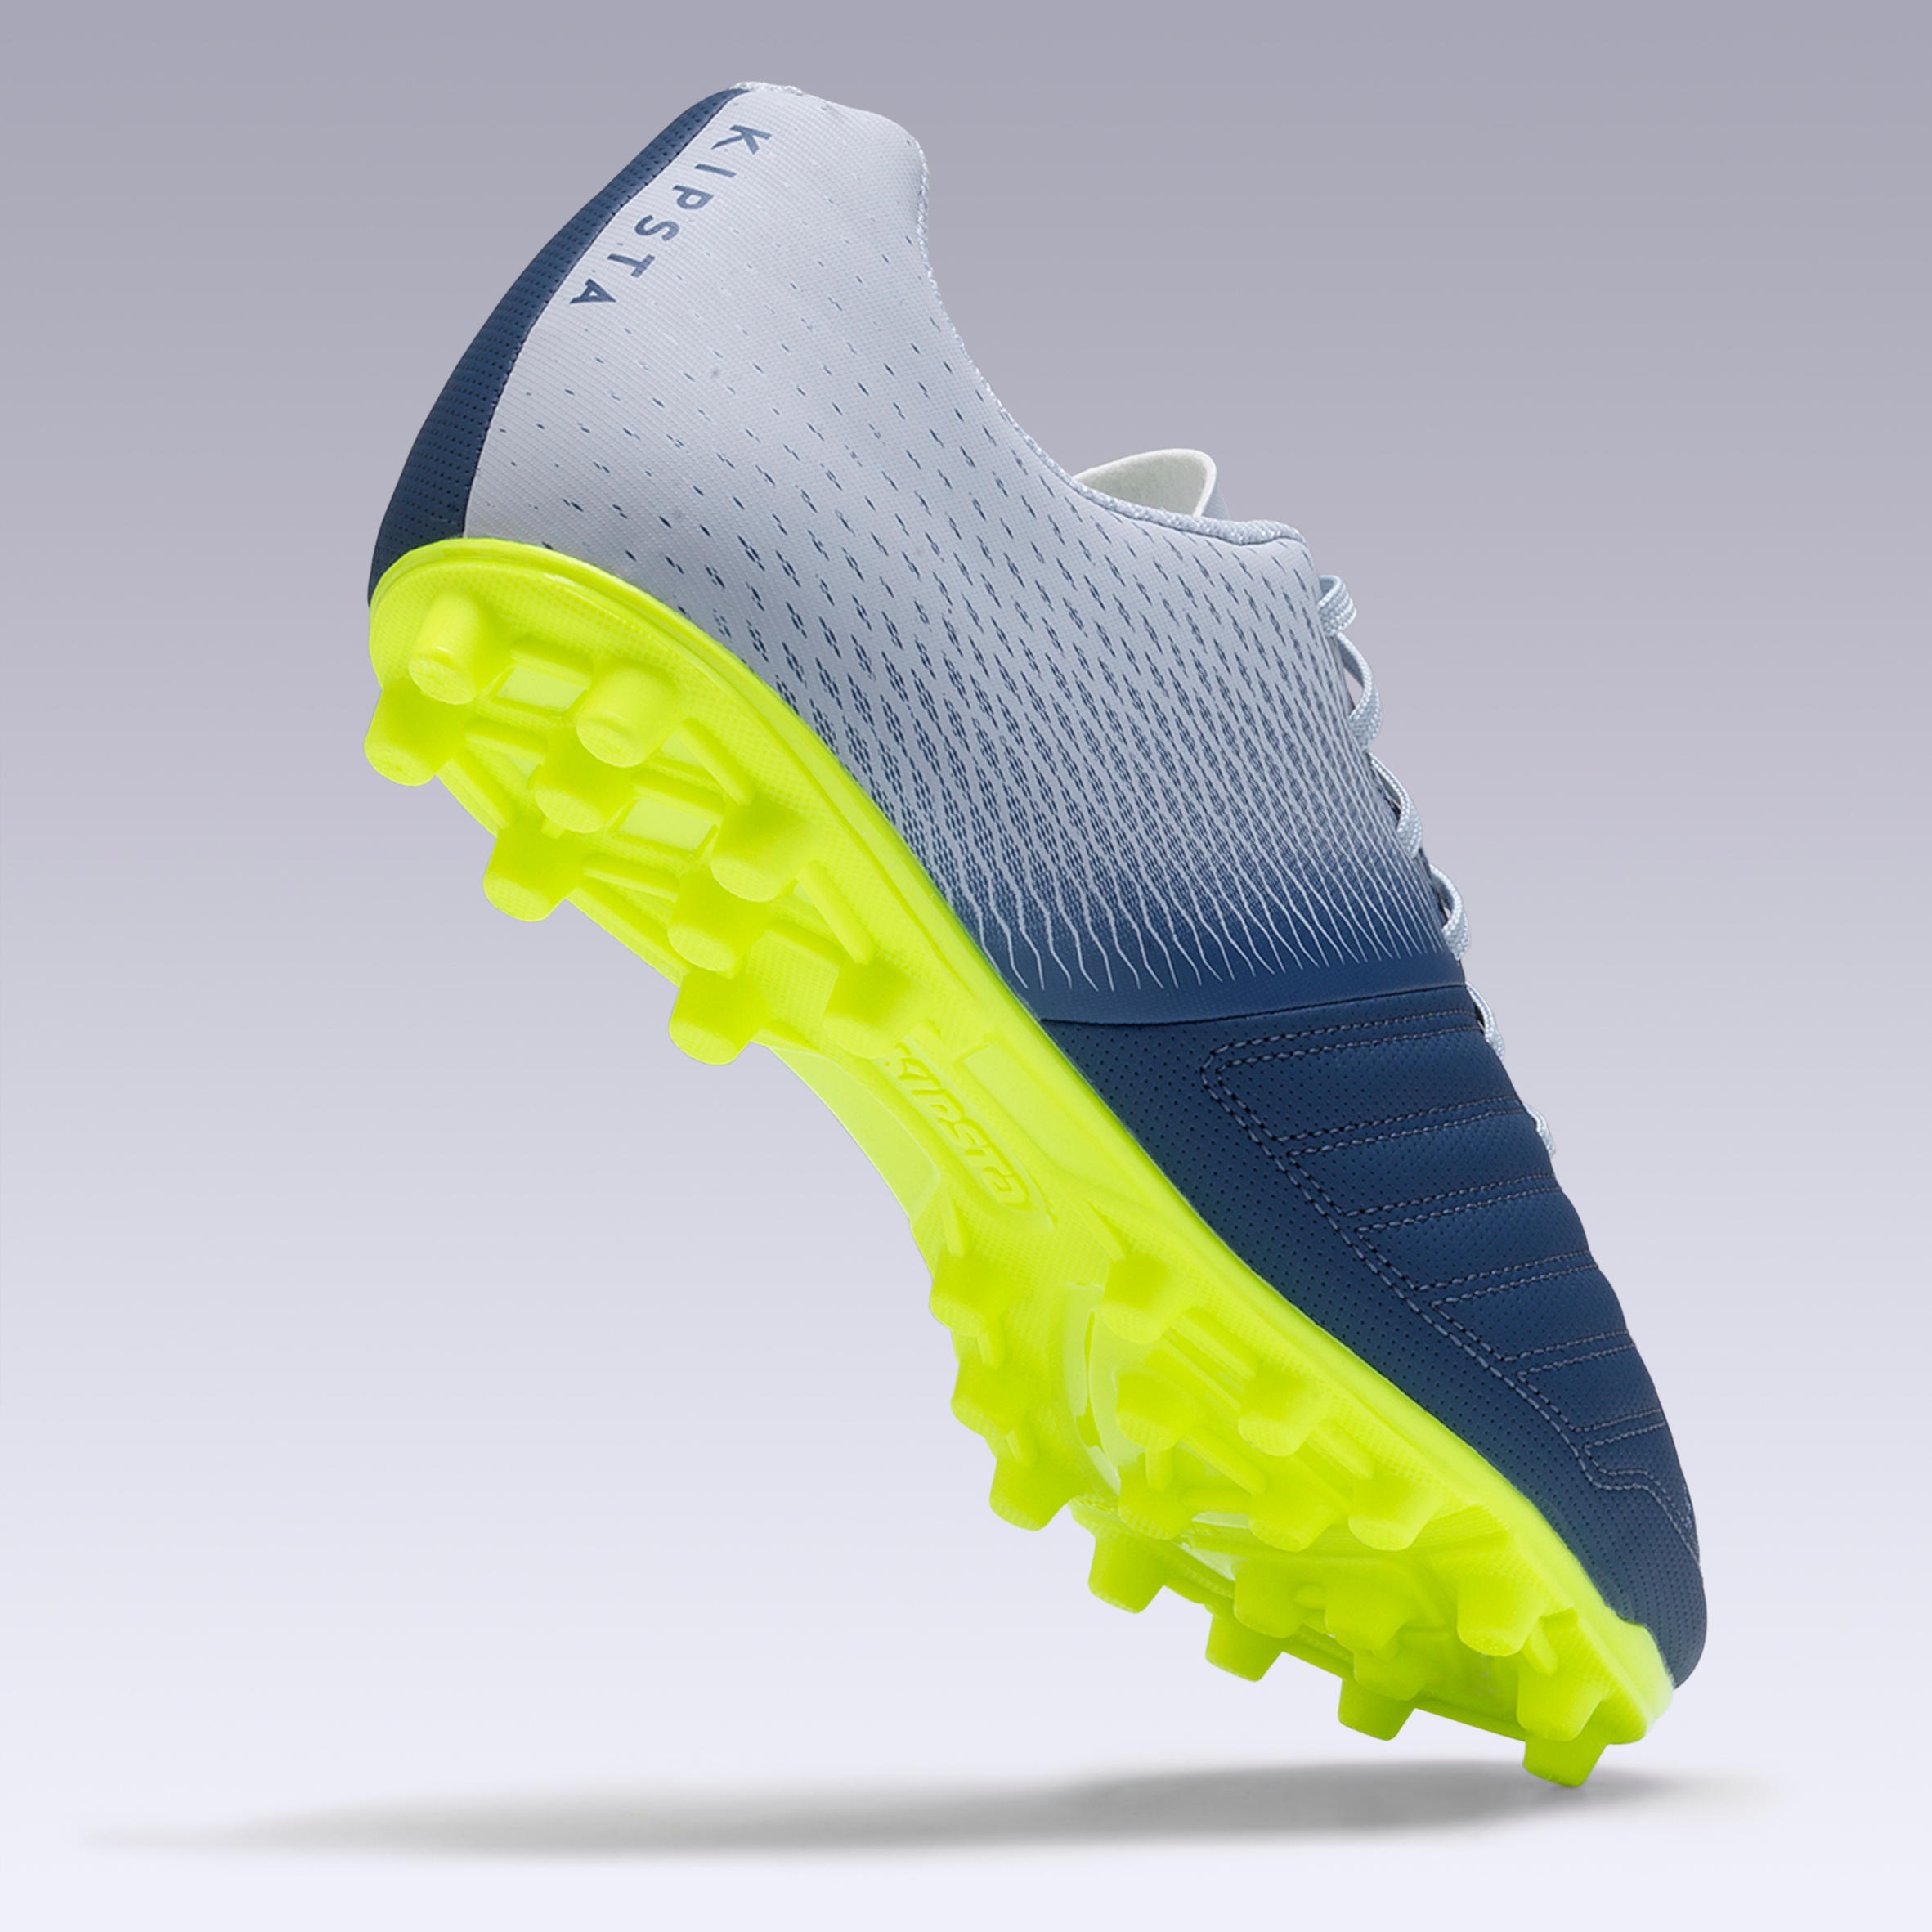 Buy Football shoes for men - Agility 